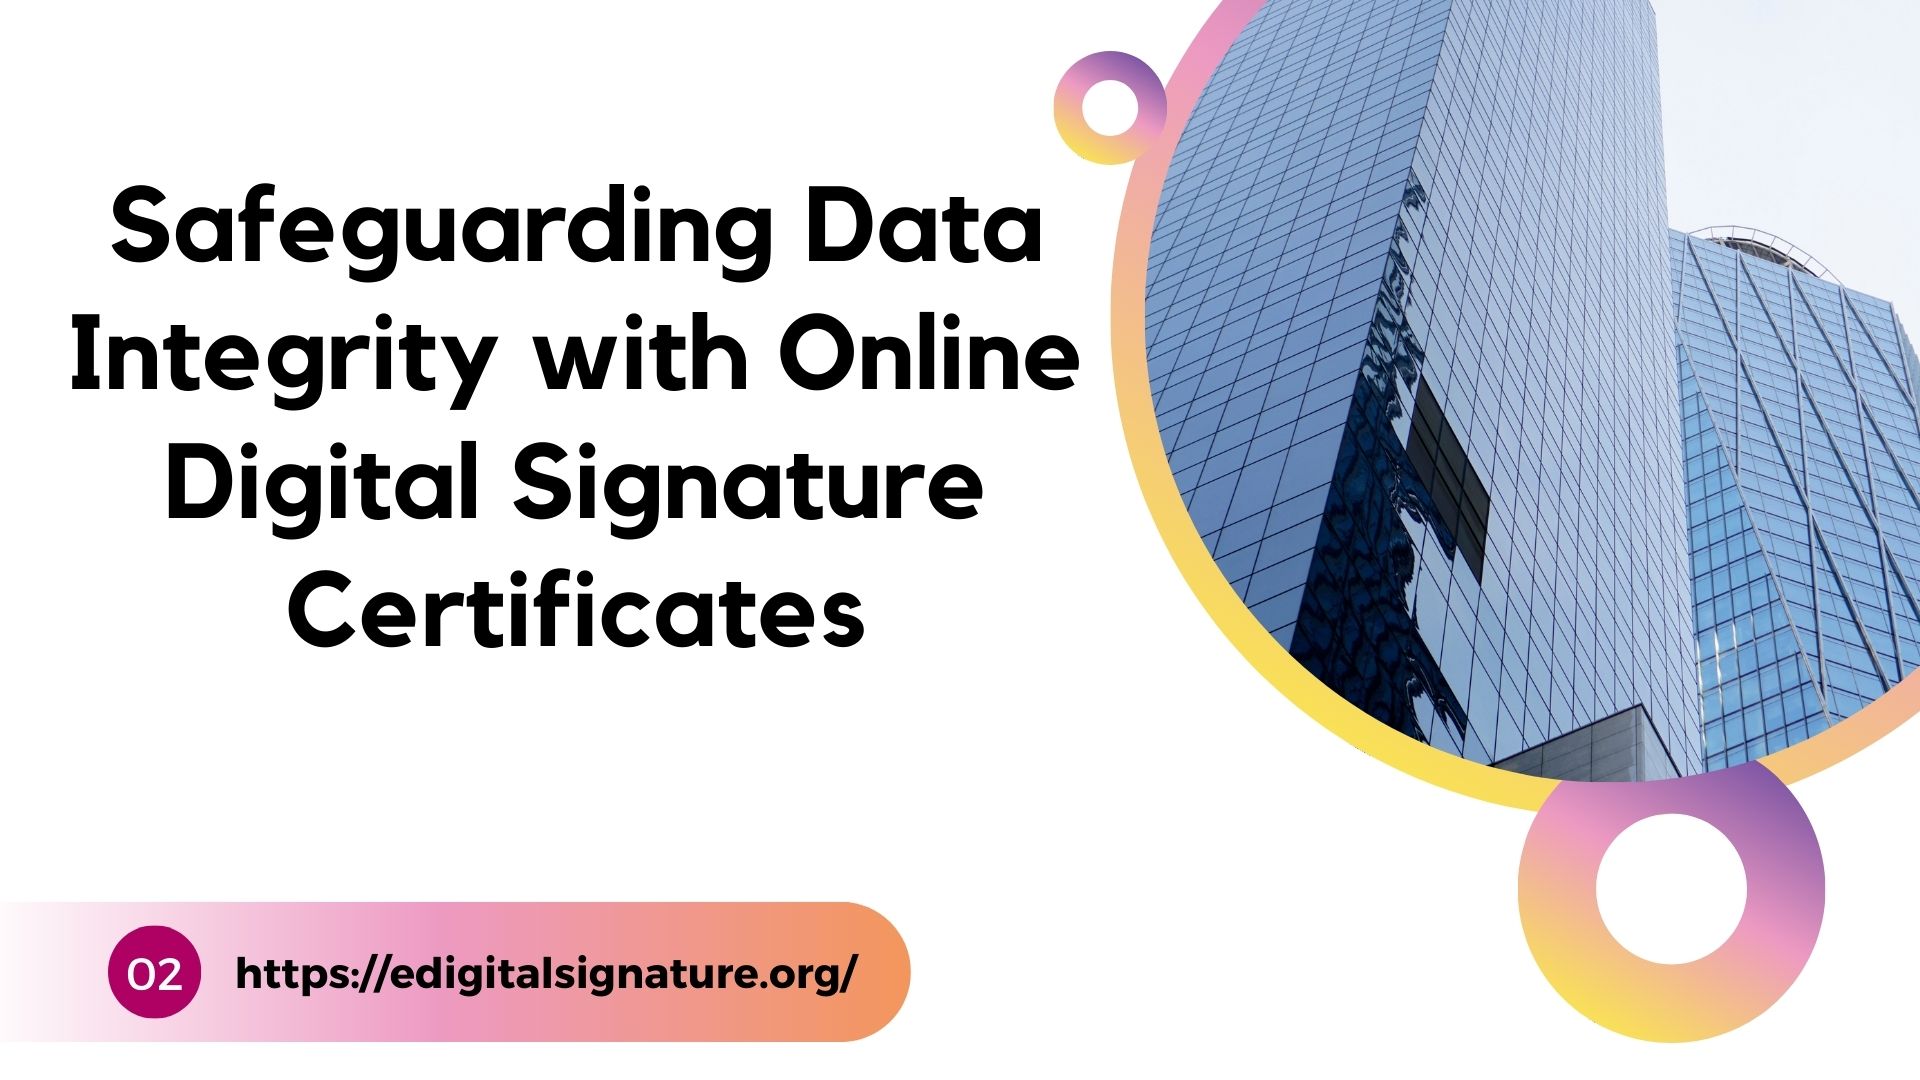 Safeguarding Data Integrity with Online Digital Signature Certificates